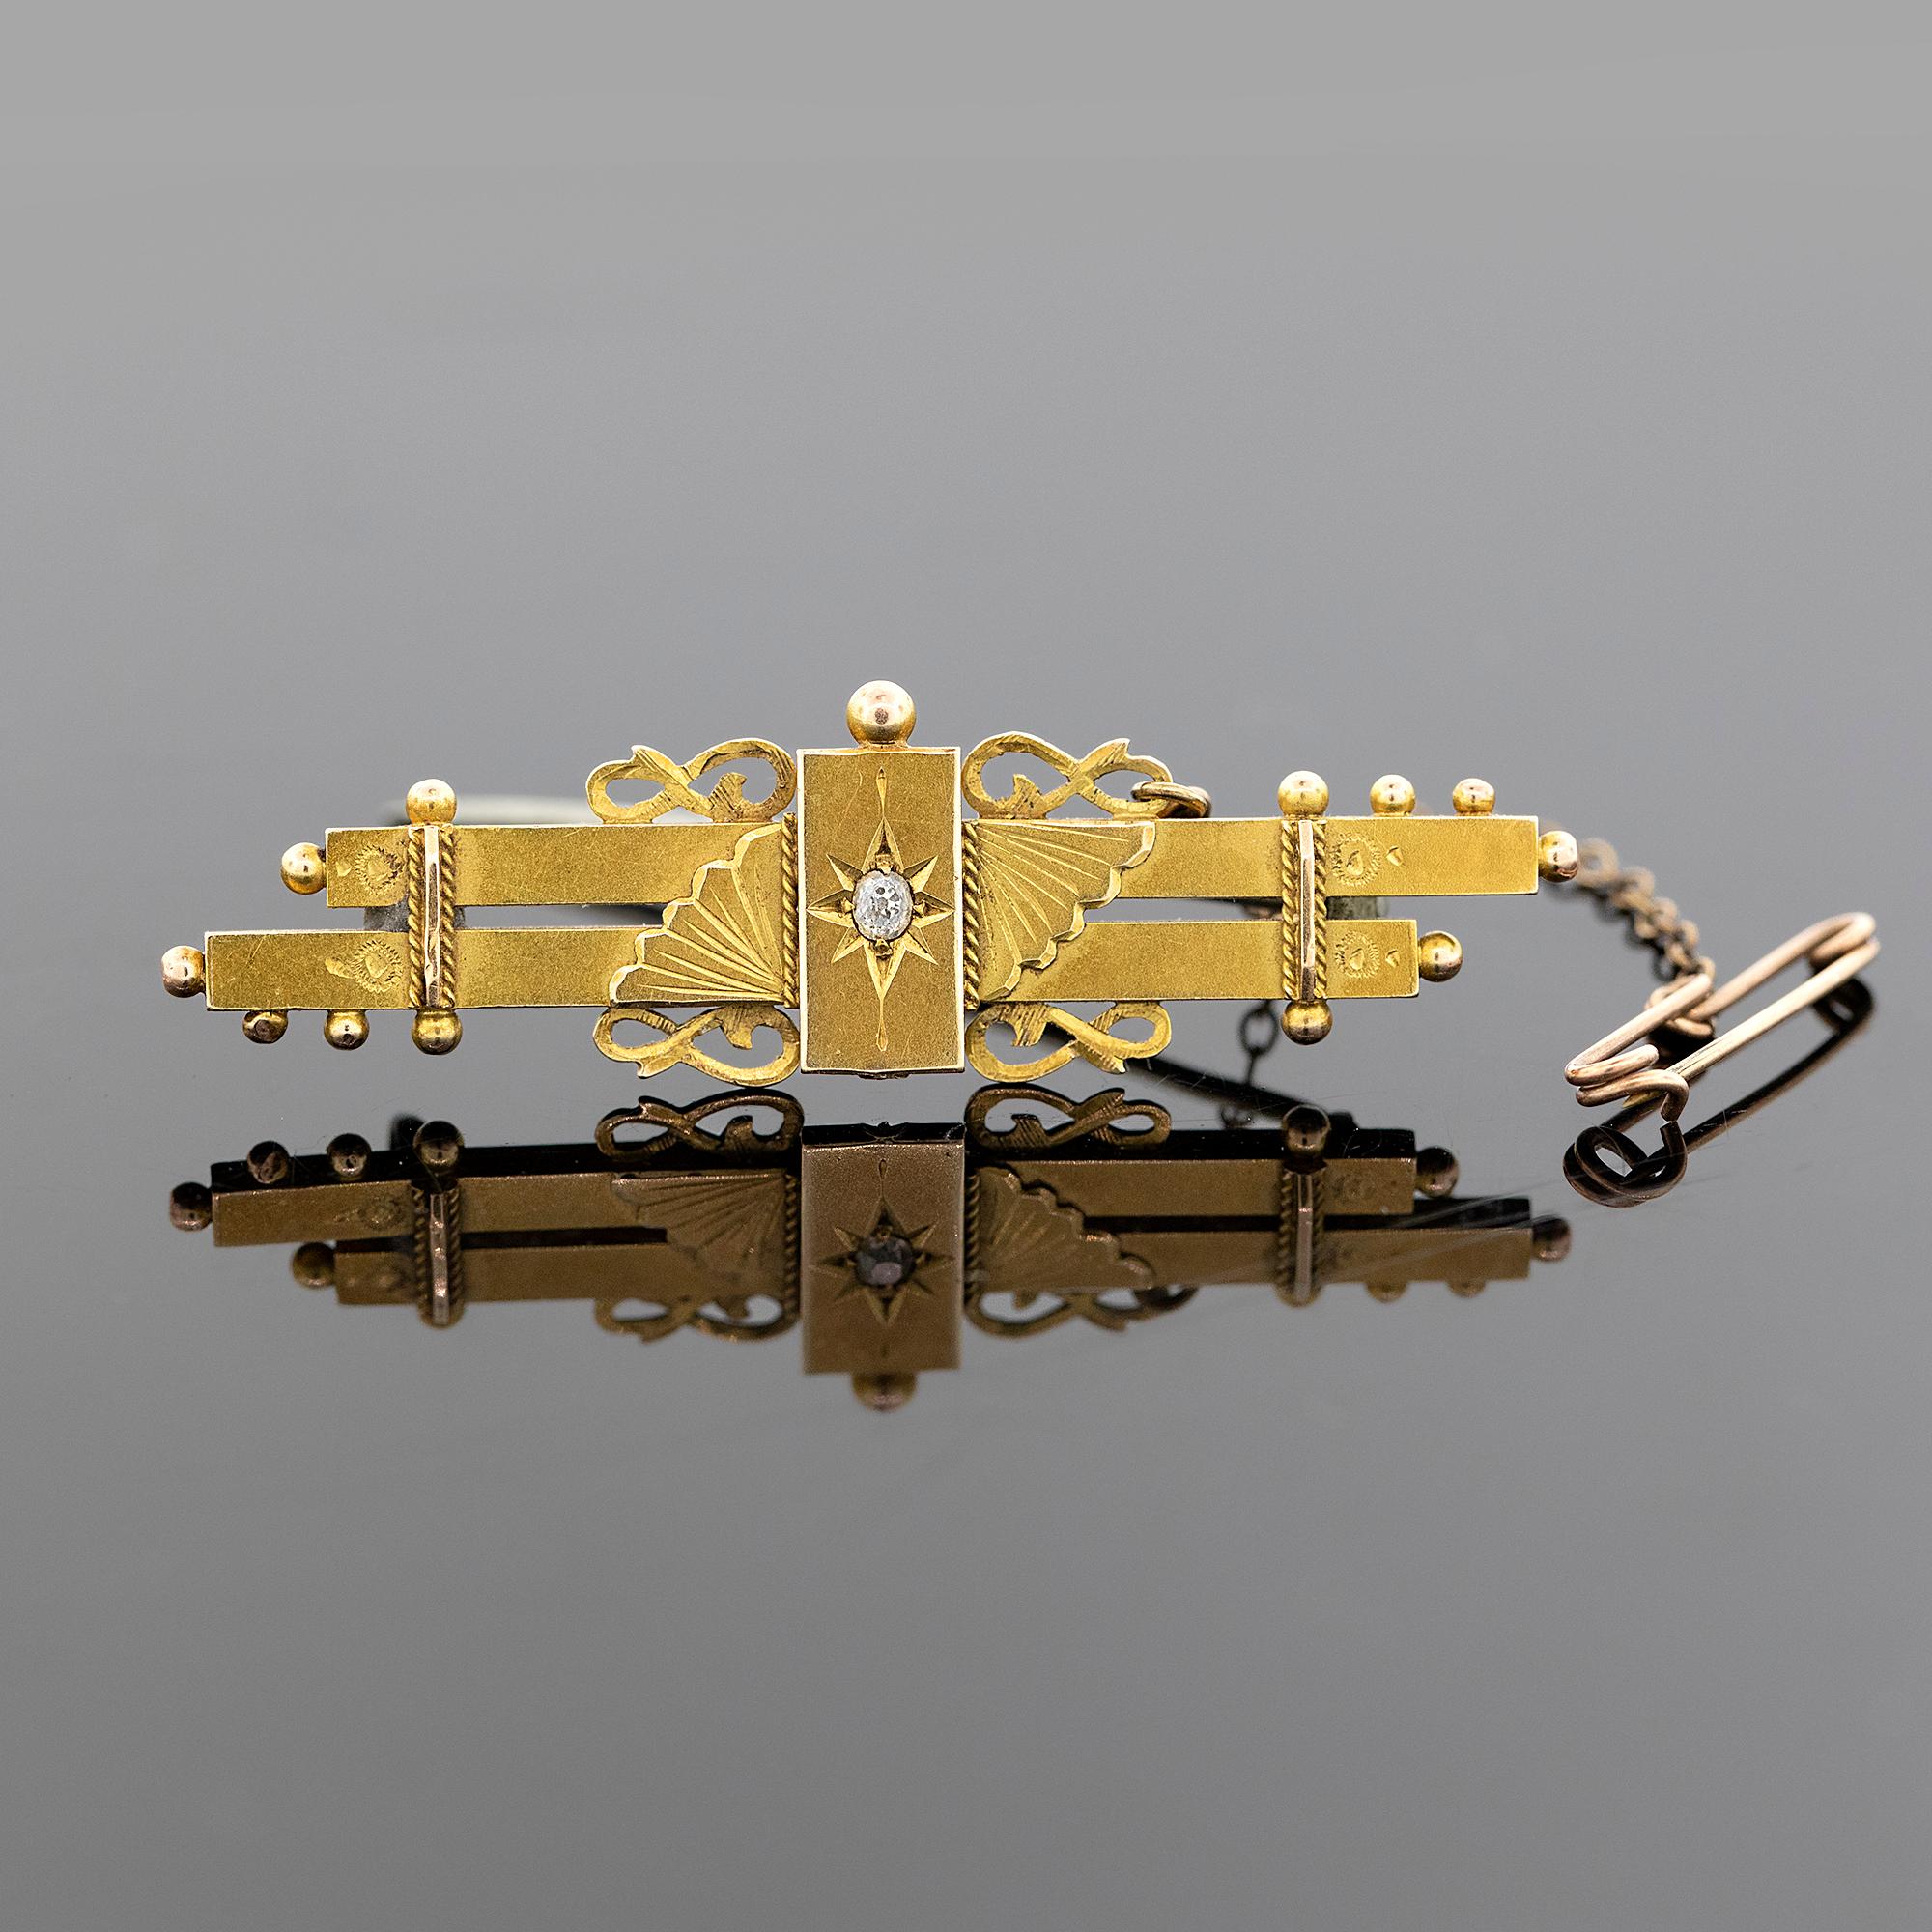 Early Australian double-bar brooch with scrolled wire-work and granulation set with one old cut diamond on raised star engraved rectangle, with fans either side. Complete with safety chain. Hallmarked with an early Australian maker mark